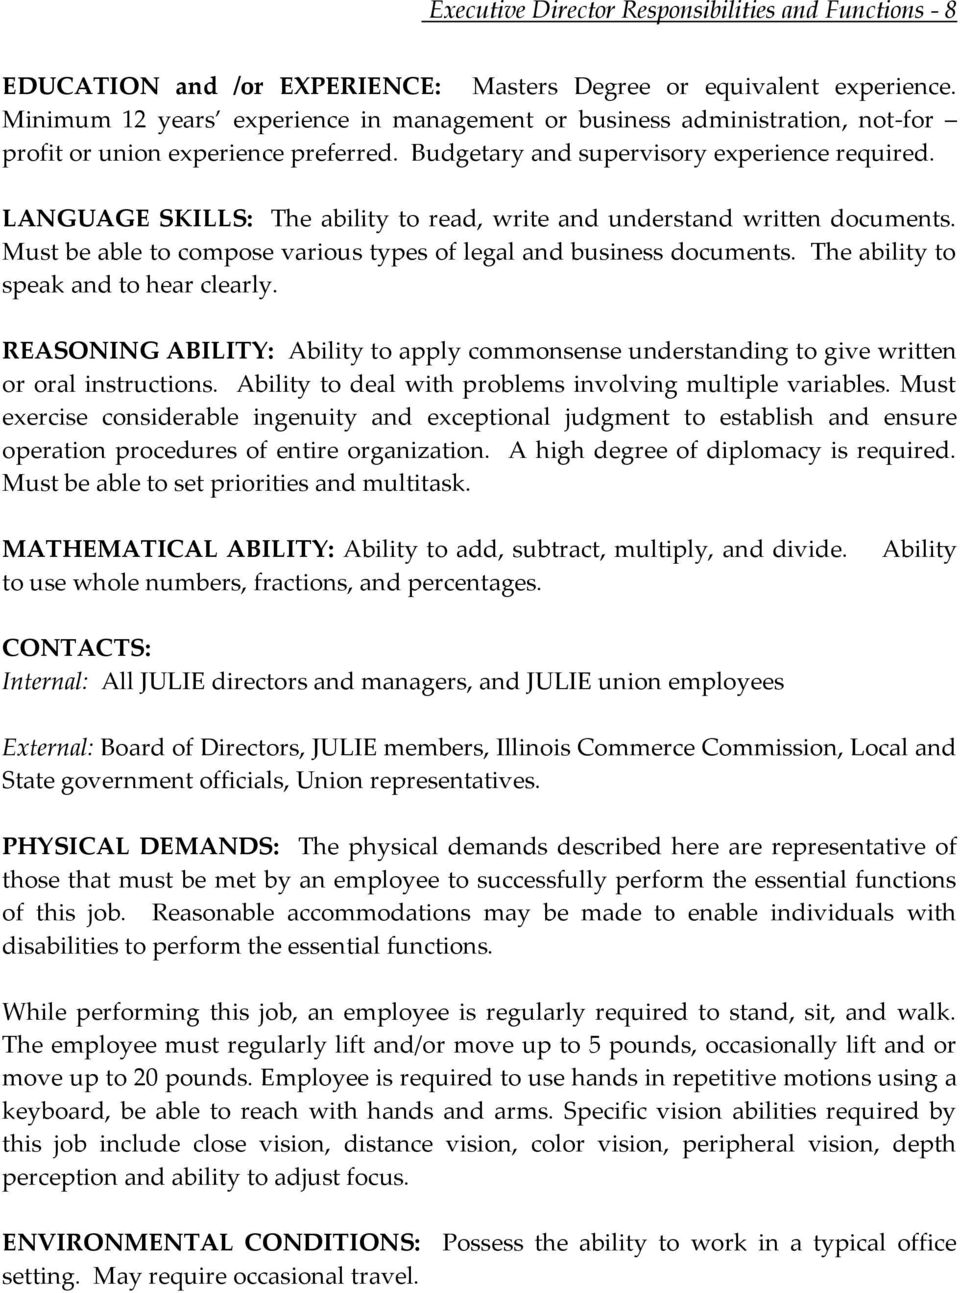 LANGUAGE SKILLS: The ability to read, write and understand written documents. Must be able to compose various types of legal and business documents. The ability to speak and to hear clearly.